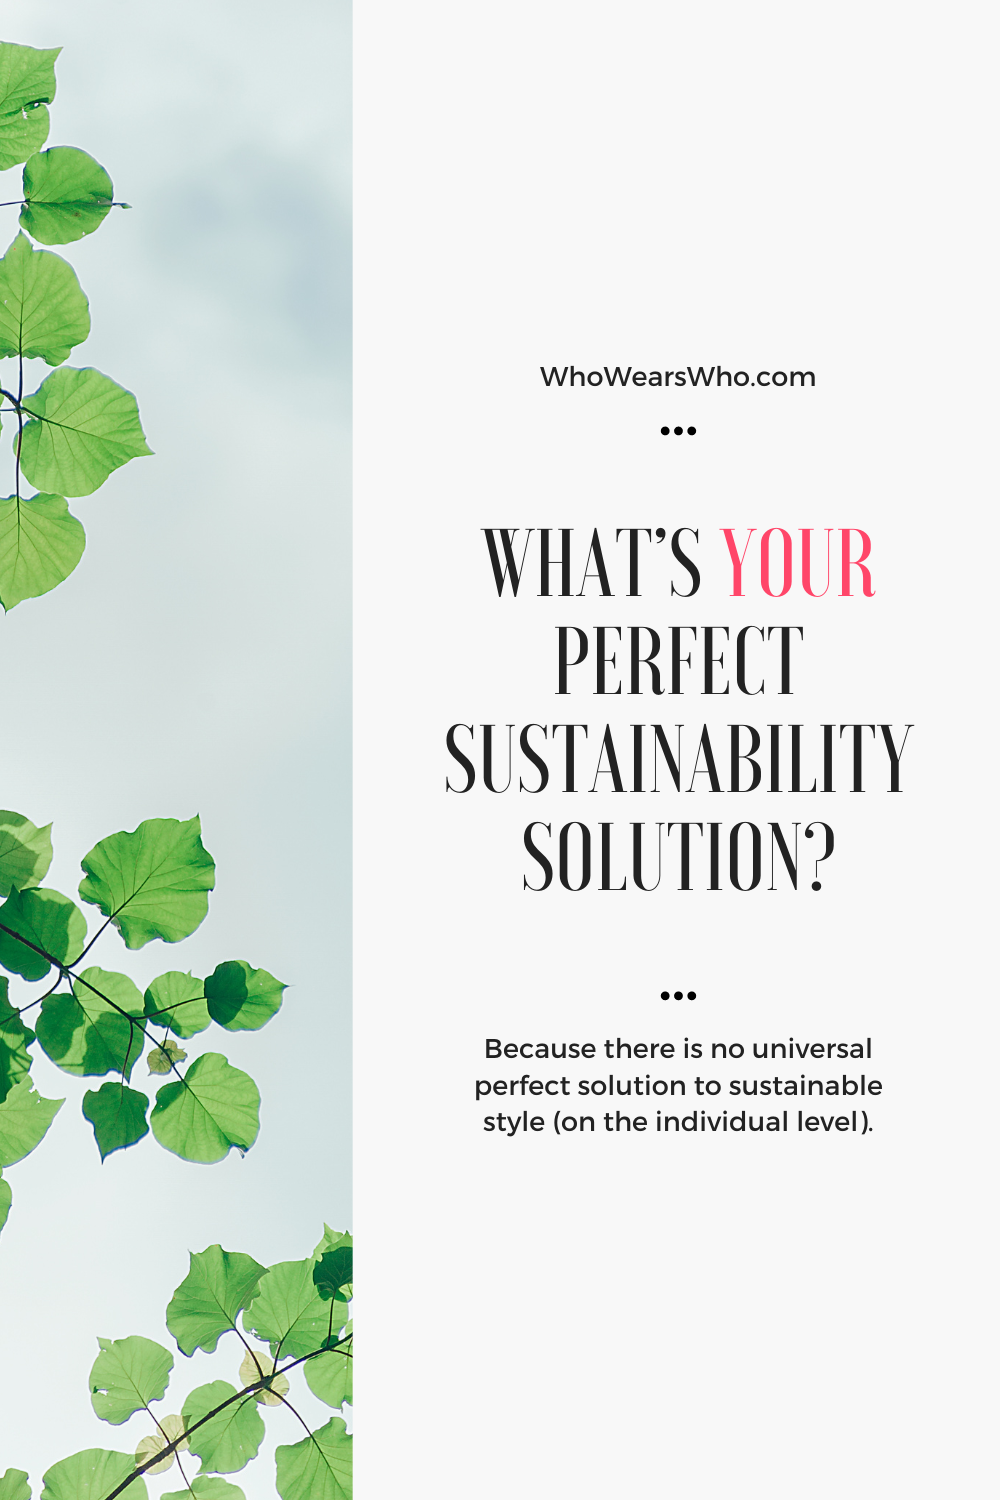 What’s YOUR perfect sustainable clothing solution